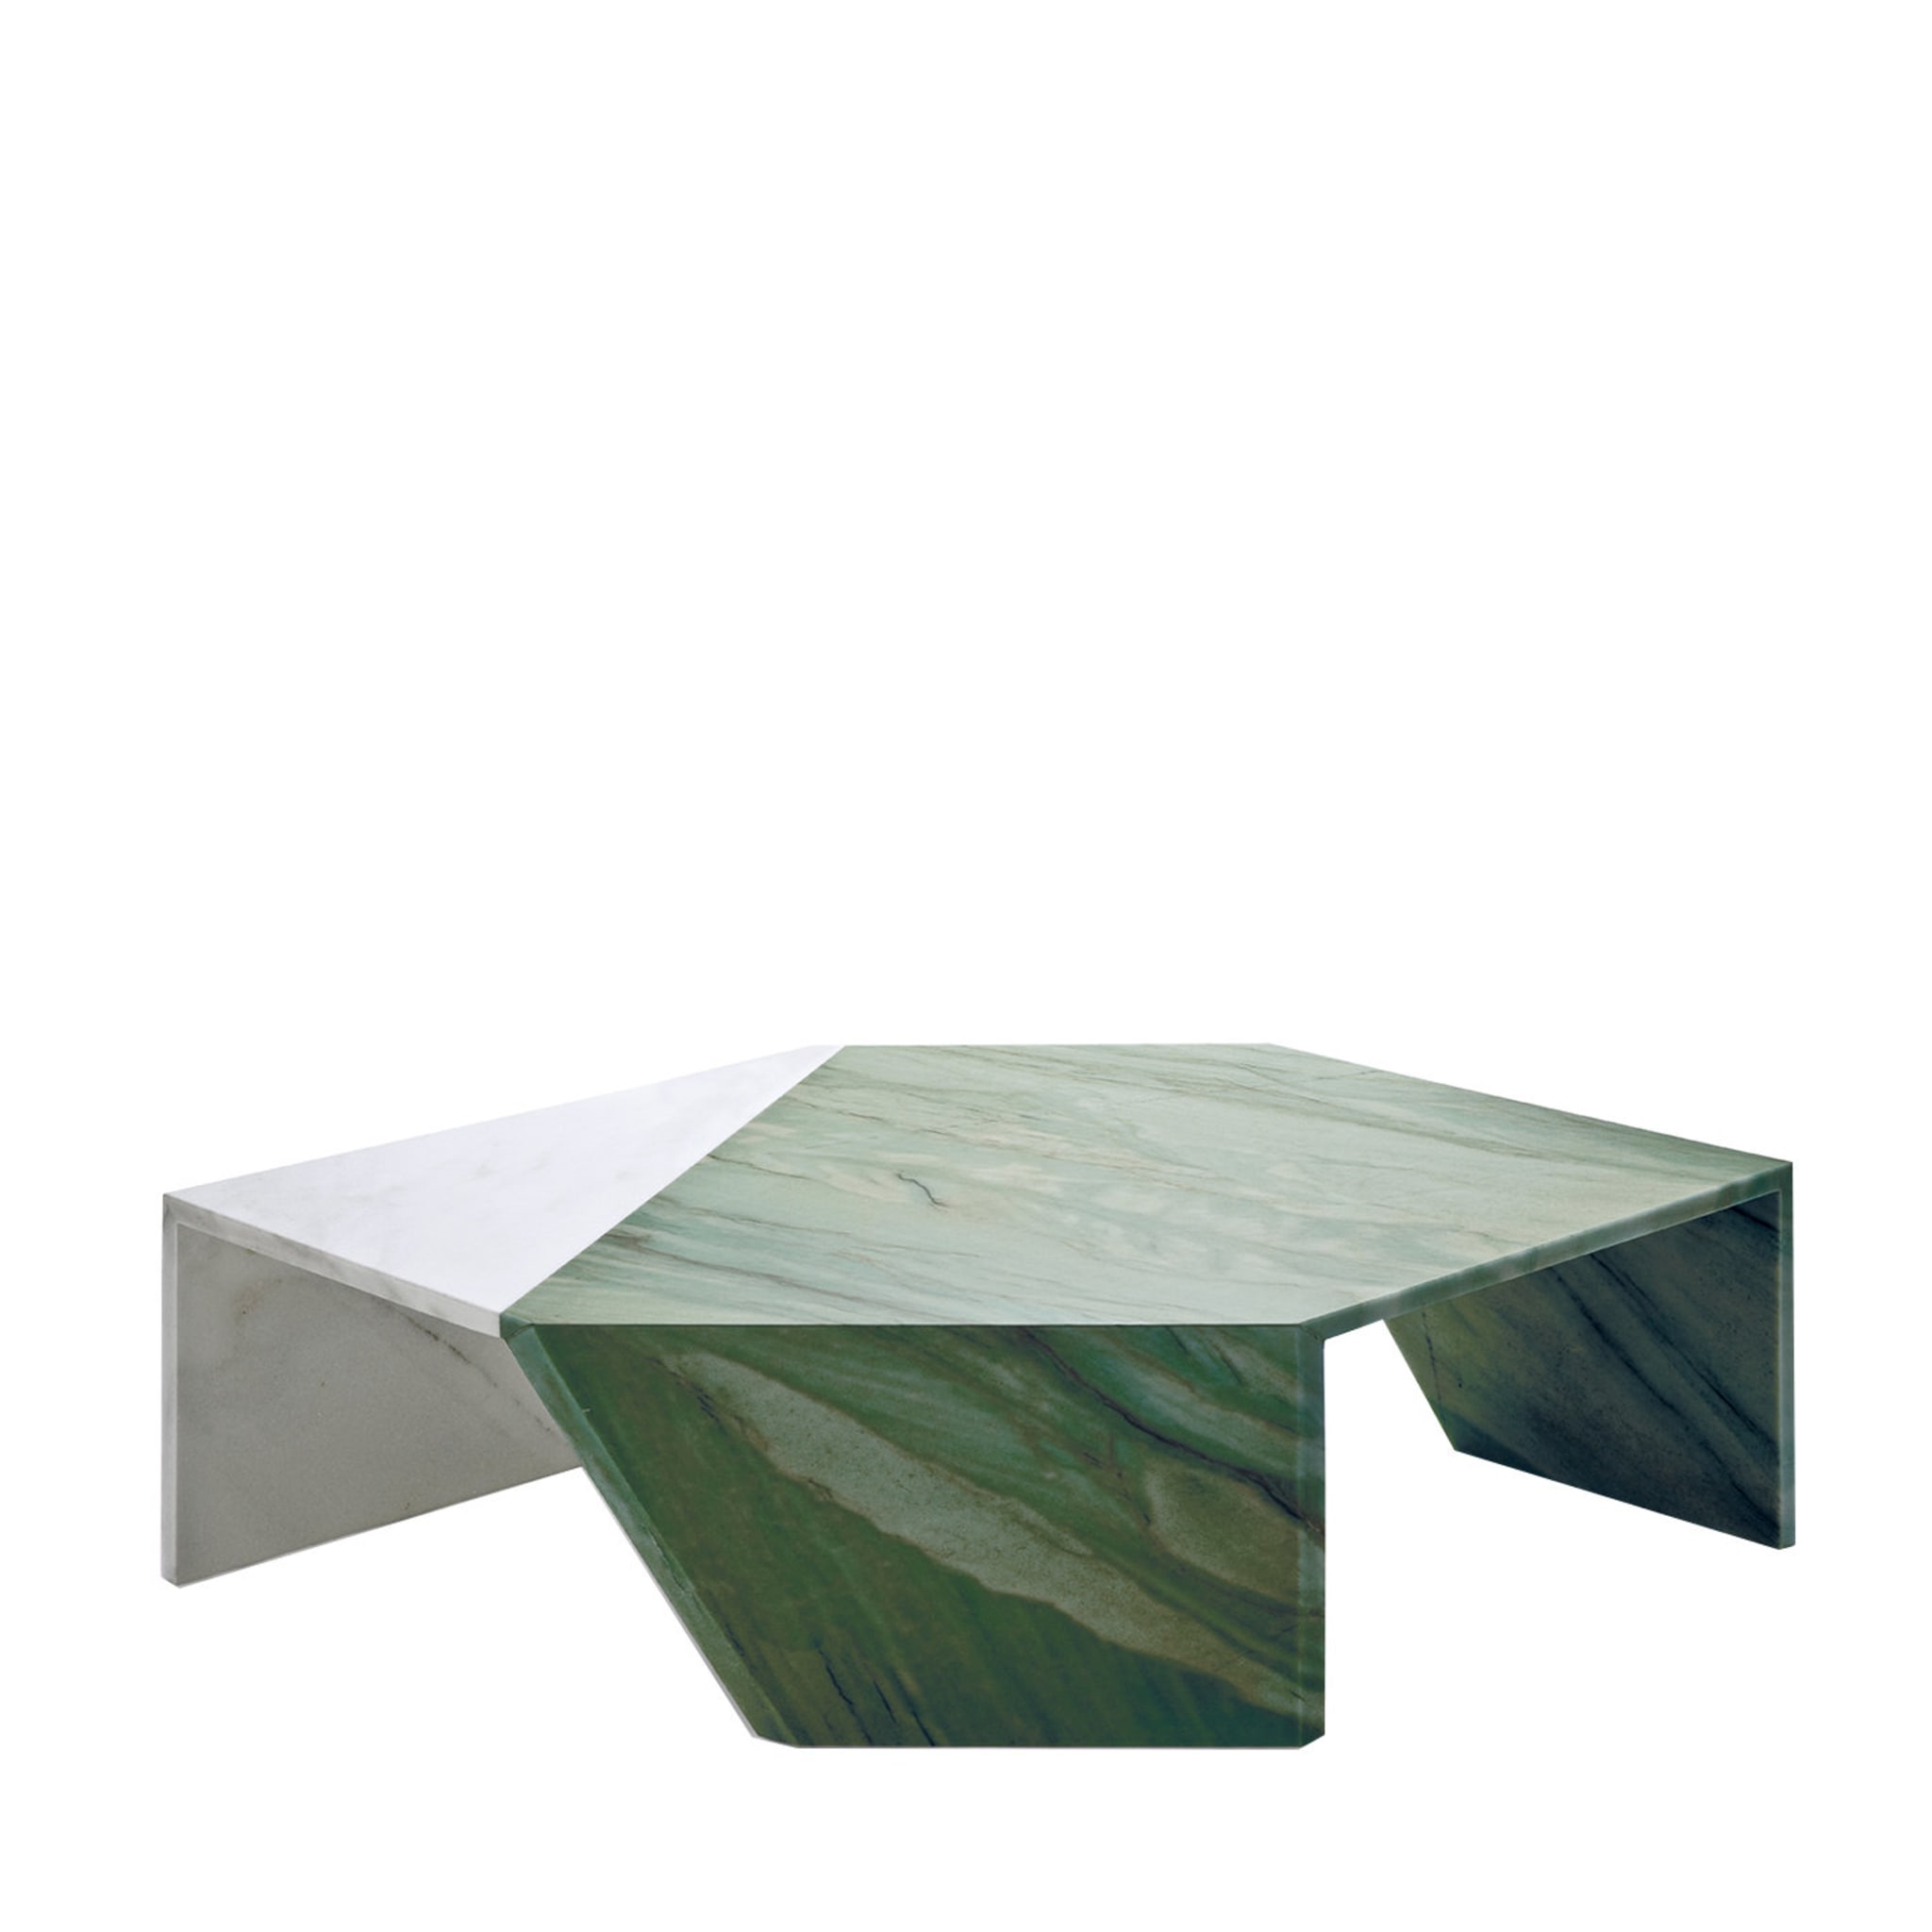 Green Origami Coffee Table by Patricia Urquiola - Main view